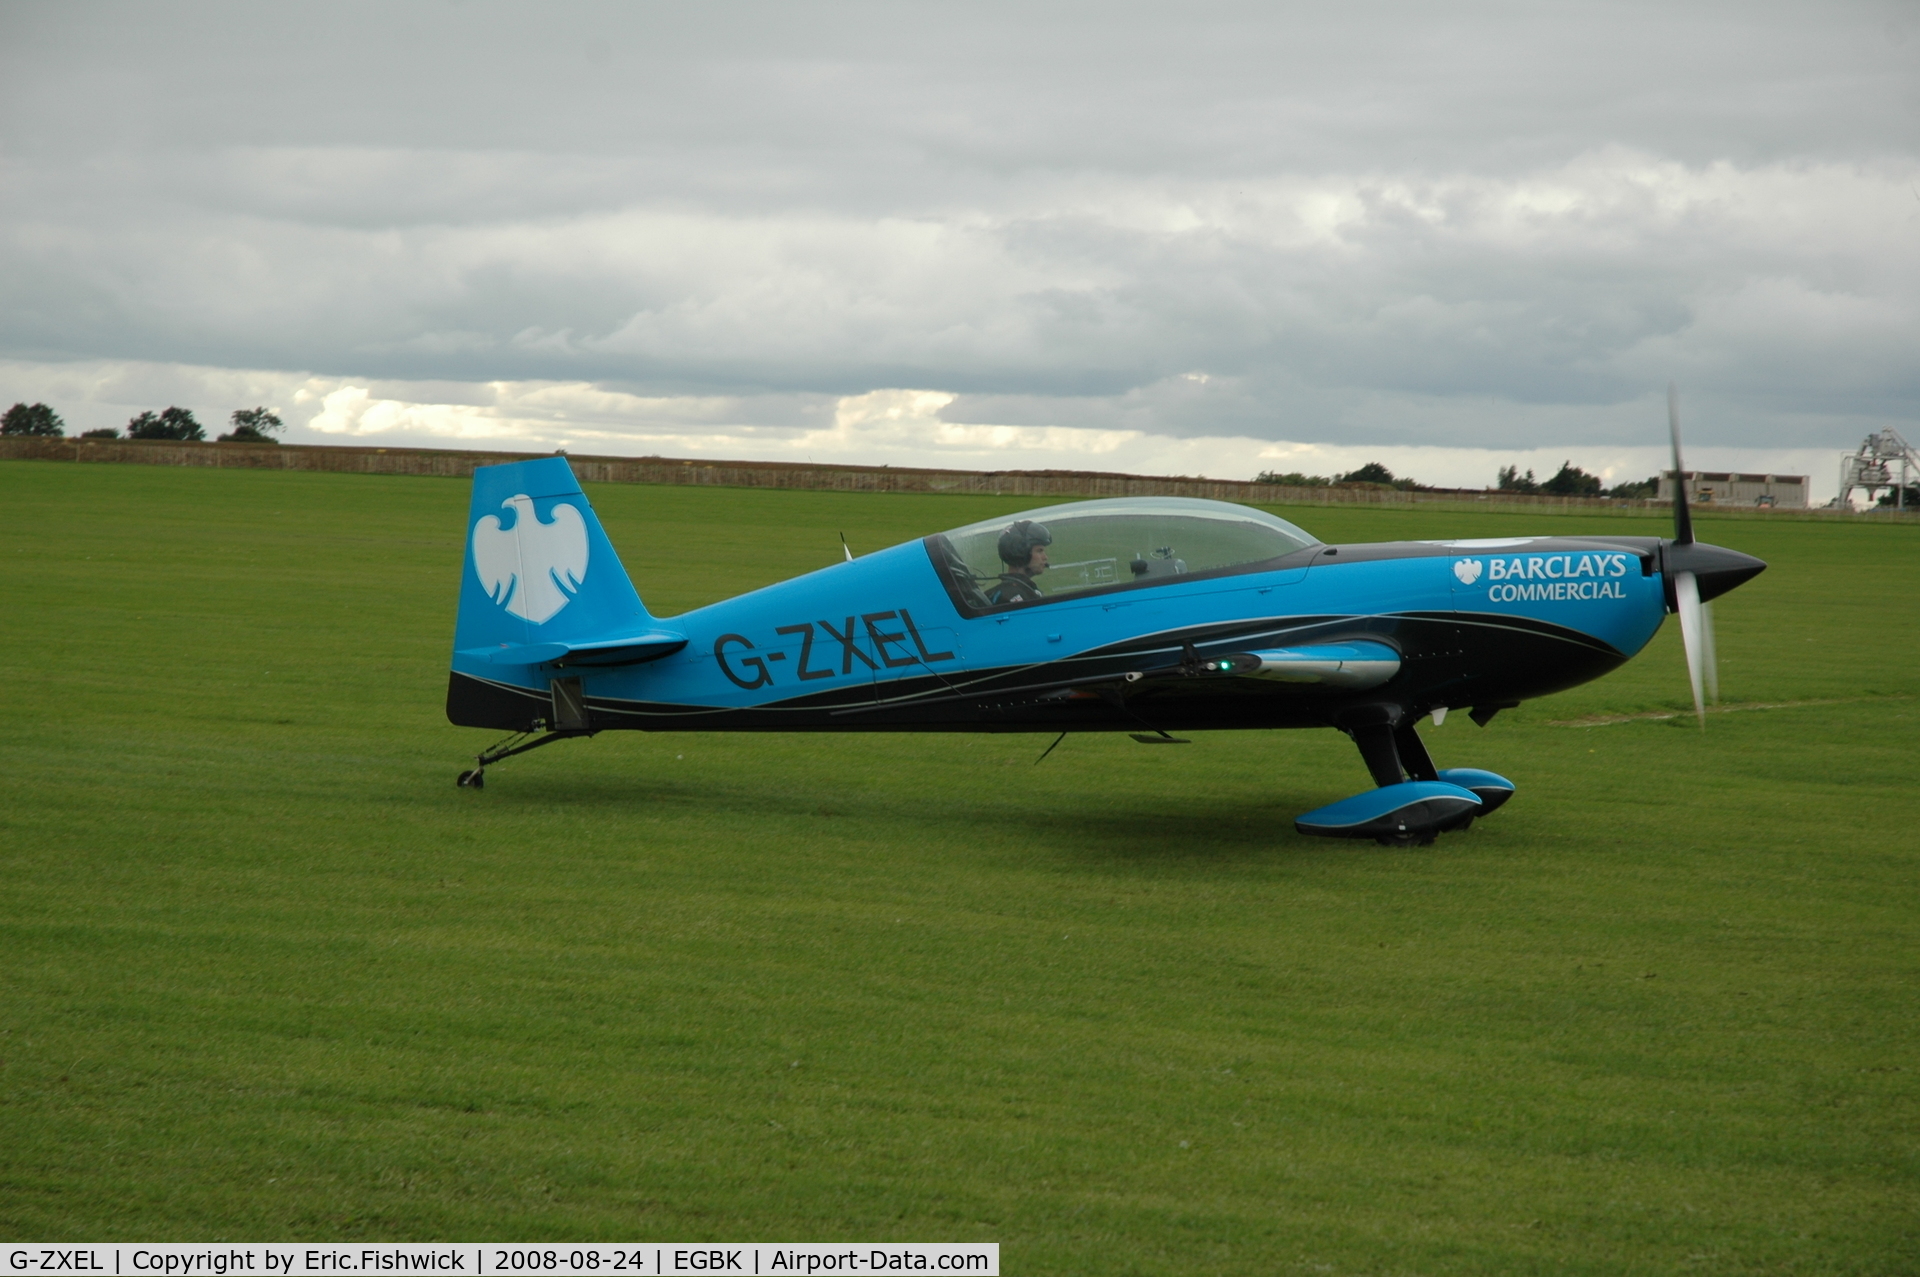 G-ZXEL, 2006 Extra EA-300L C/N 1224, 2. G-ZXEL at Sywell Airshow 24 Aug 2008